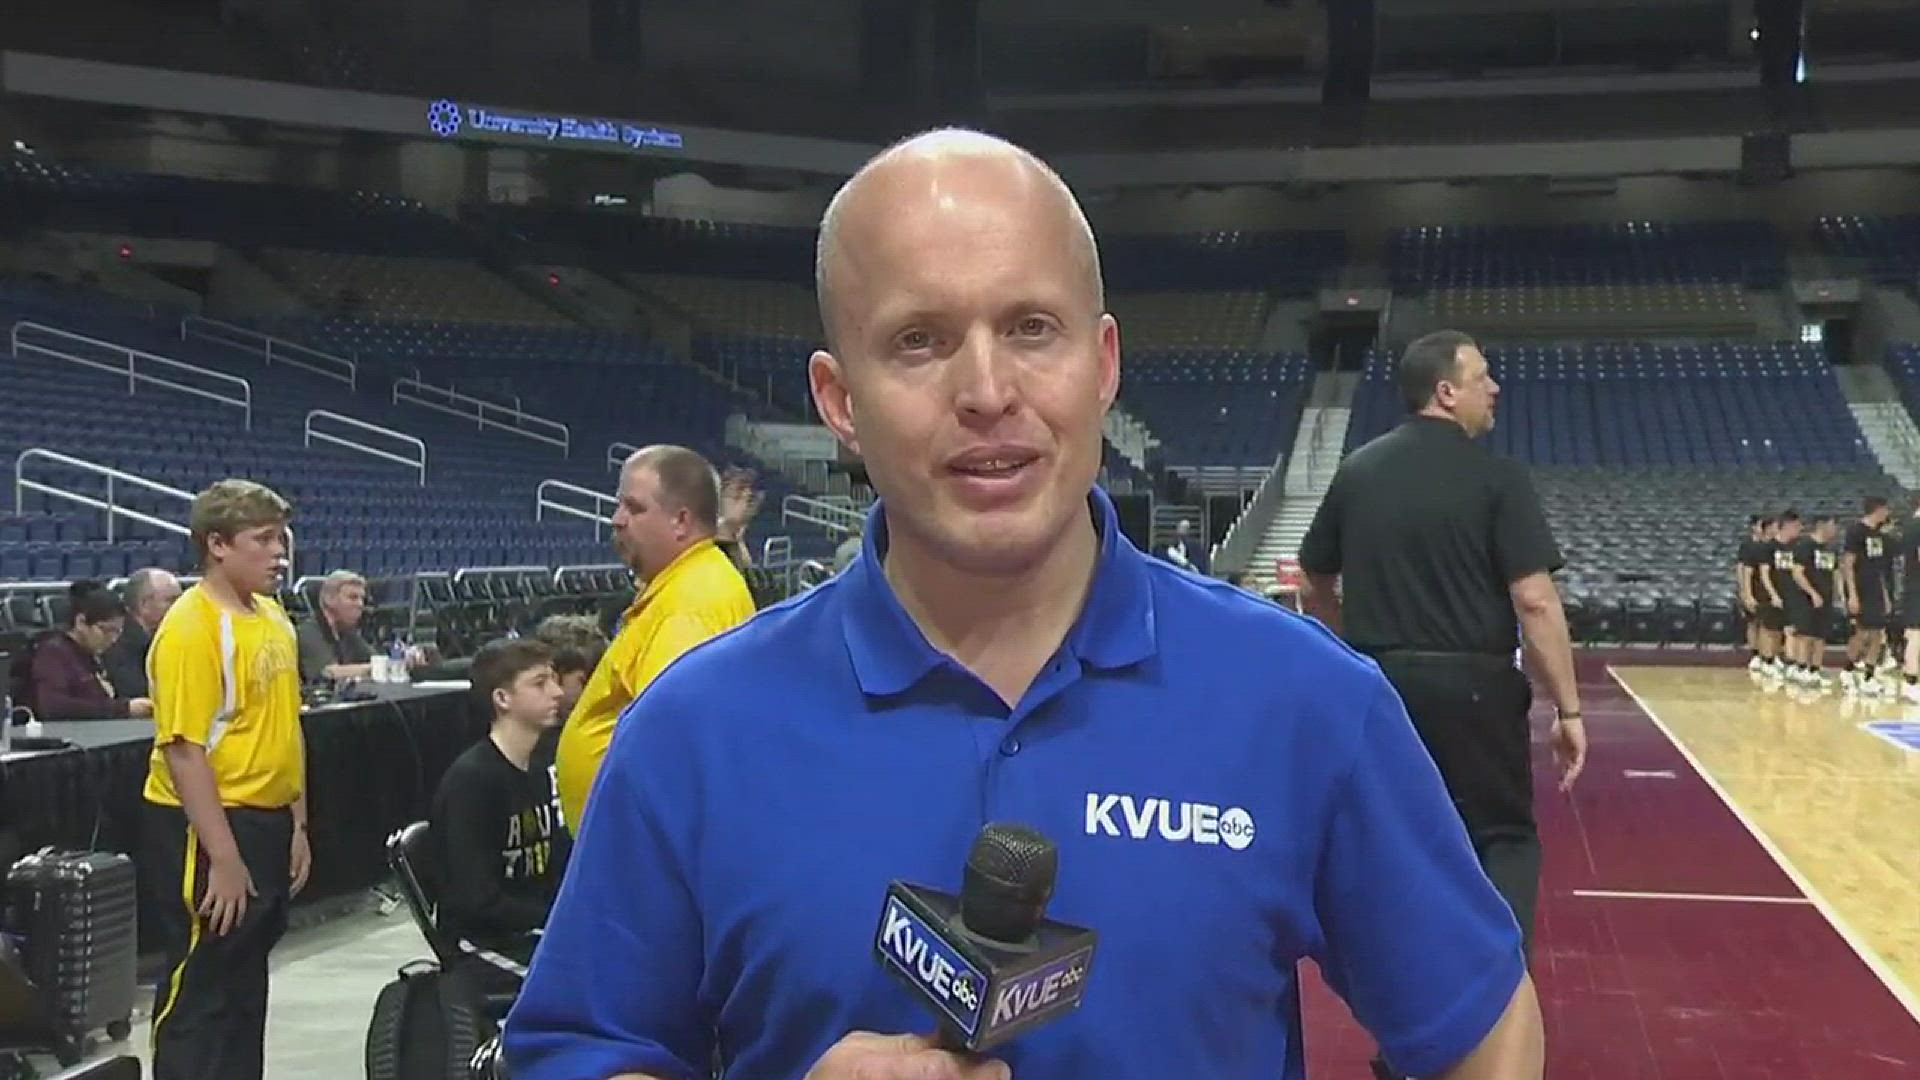 Thorndale beats Muenster to advance to the 2A Championship Game on Saturday. KVUE's Shawn Clynch has the story.